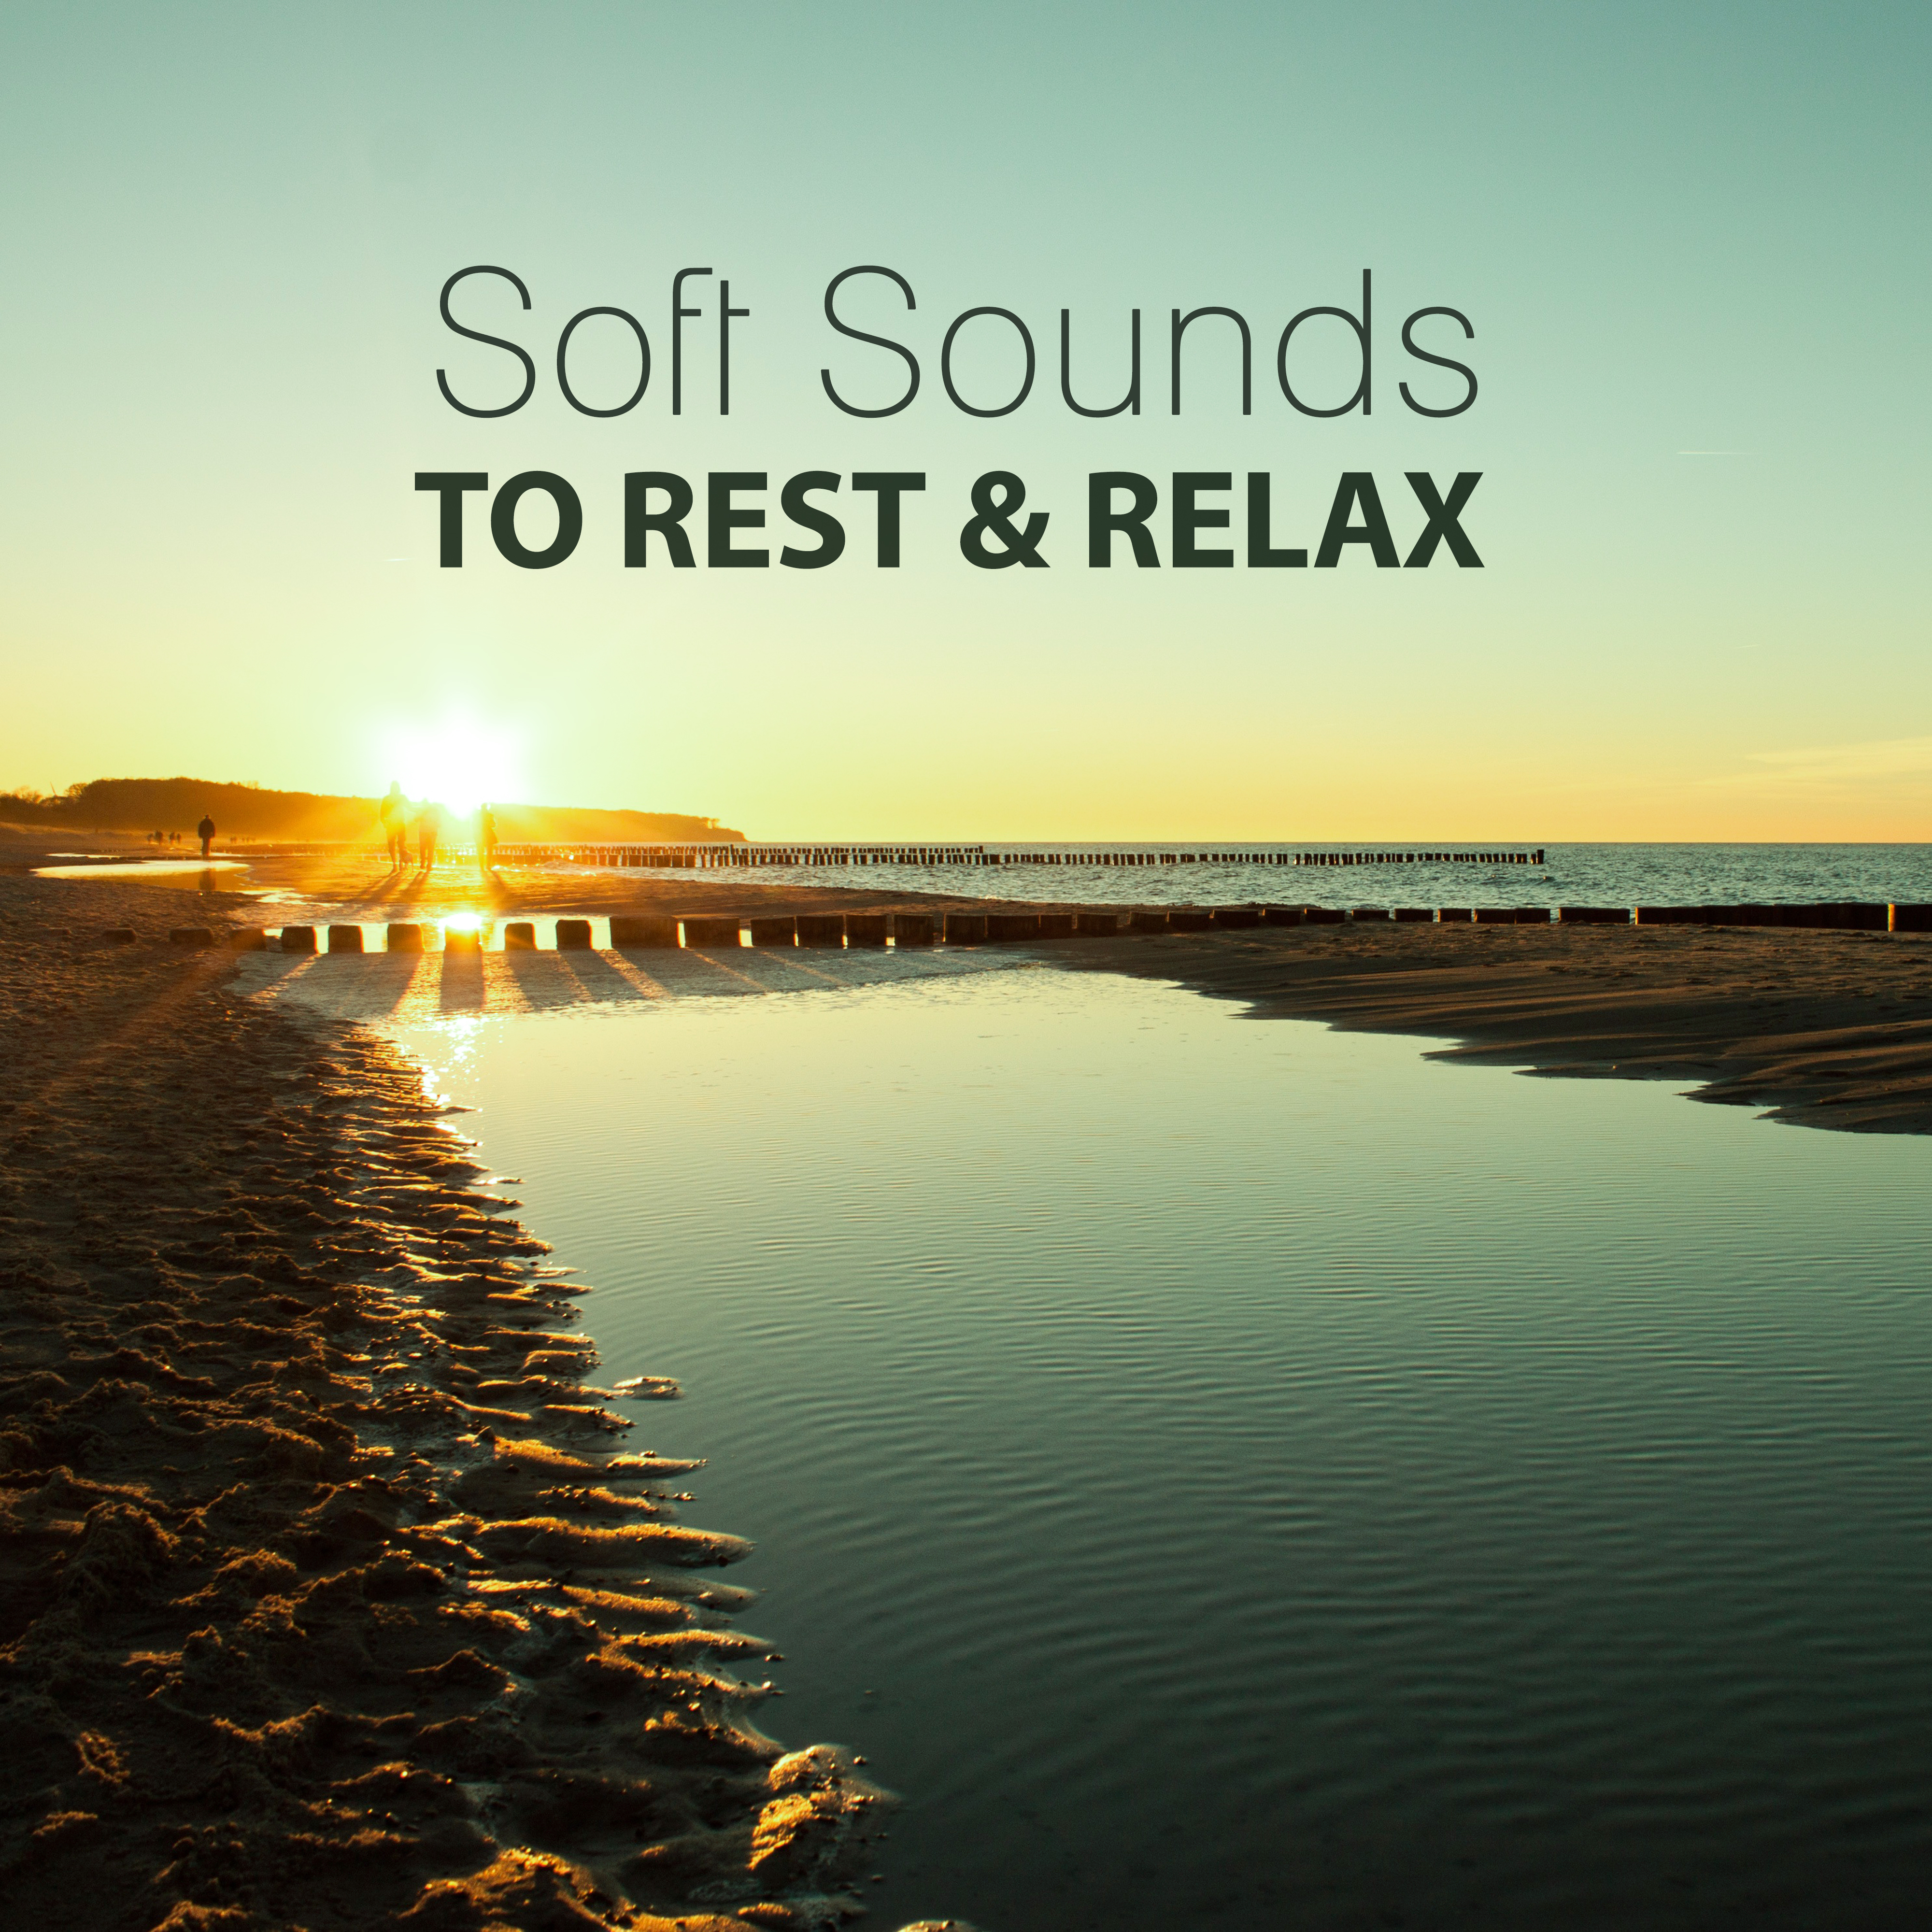 Soft Sounds to Rest  Relax  Calming Chill Out Music, Rest a Bit, Soothing Sounds